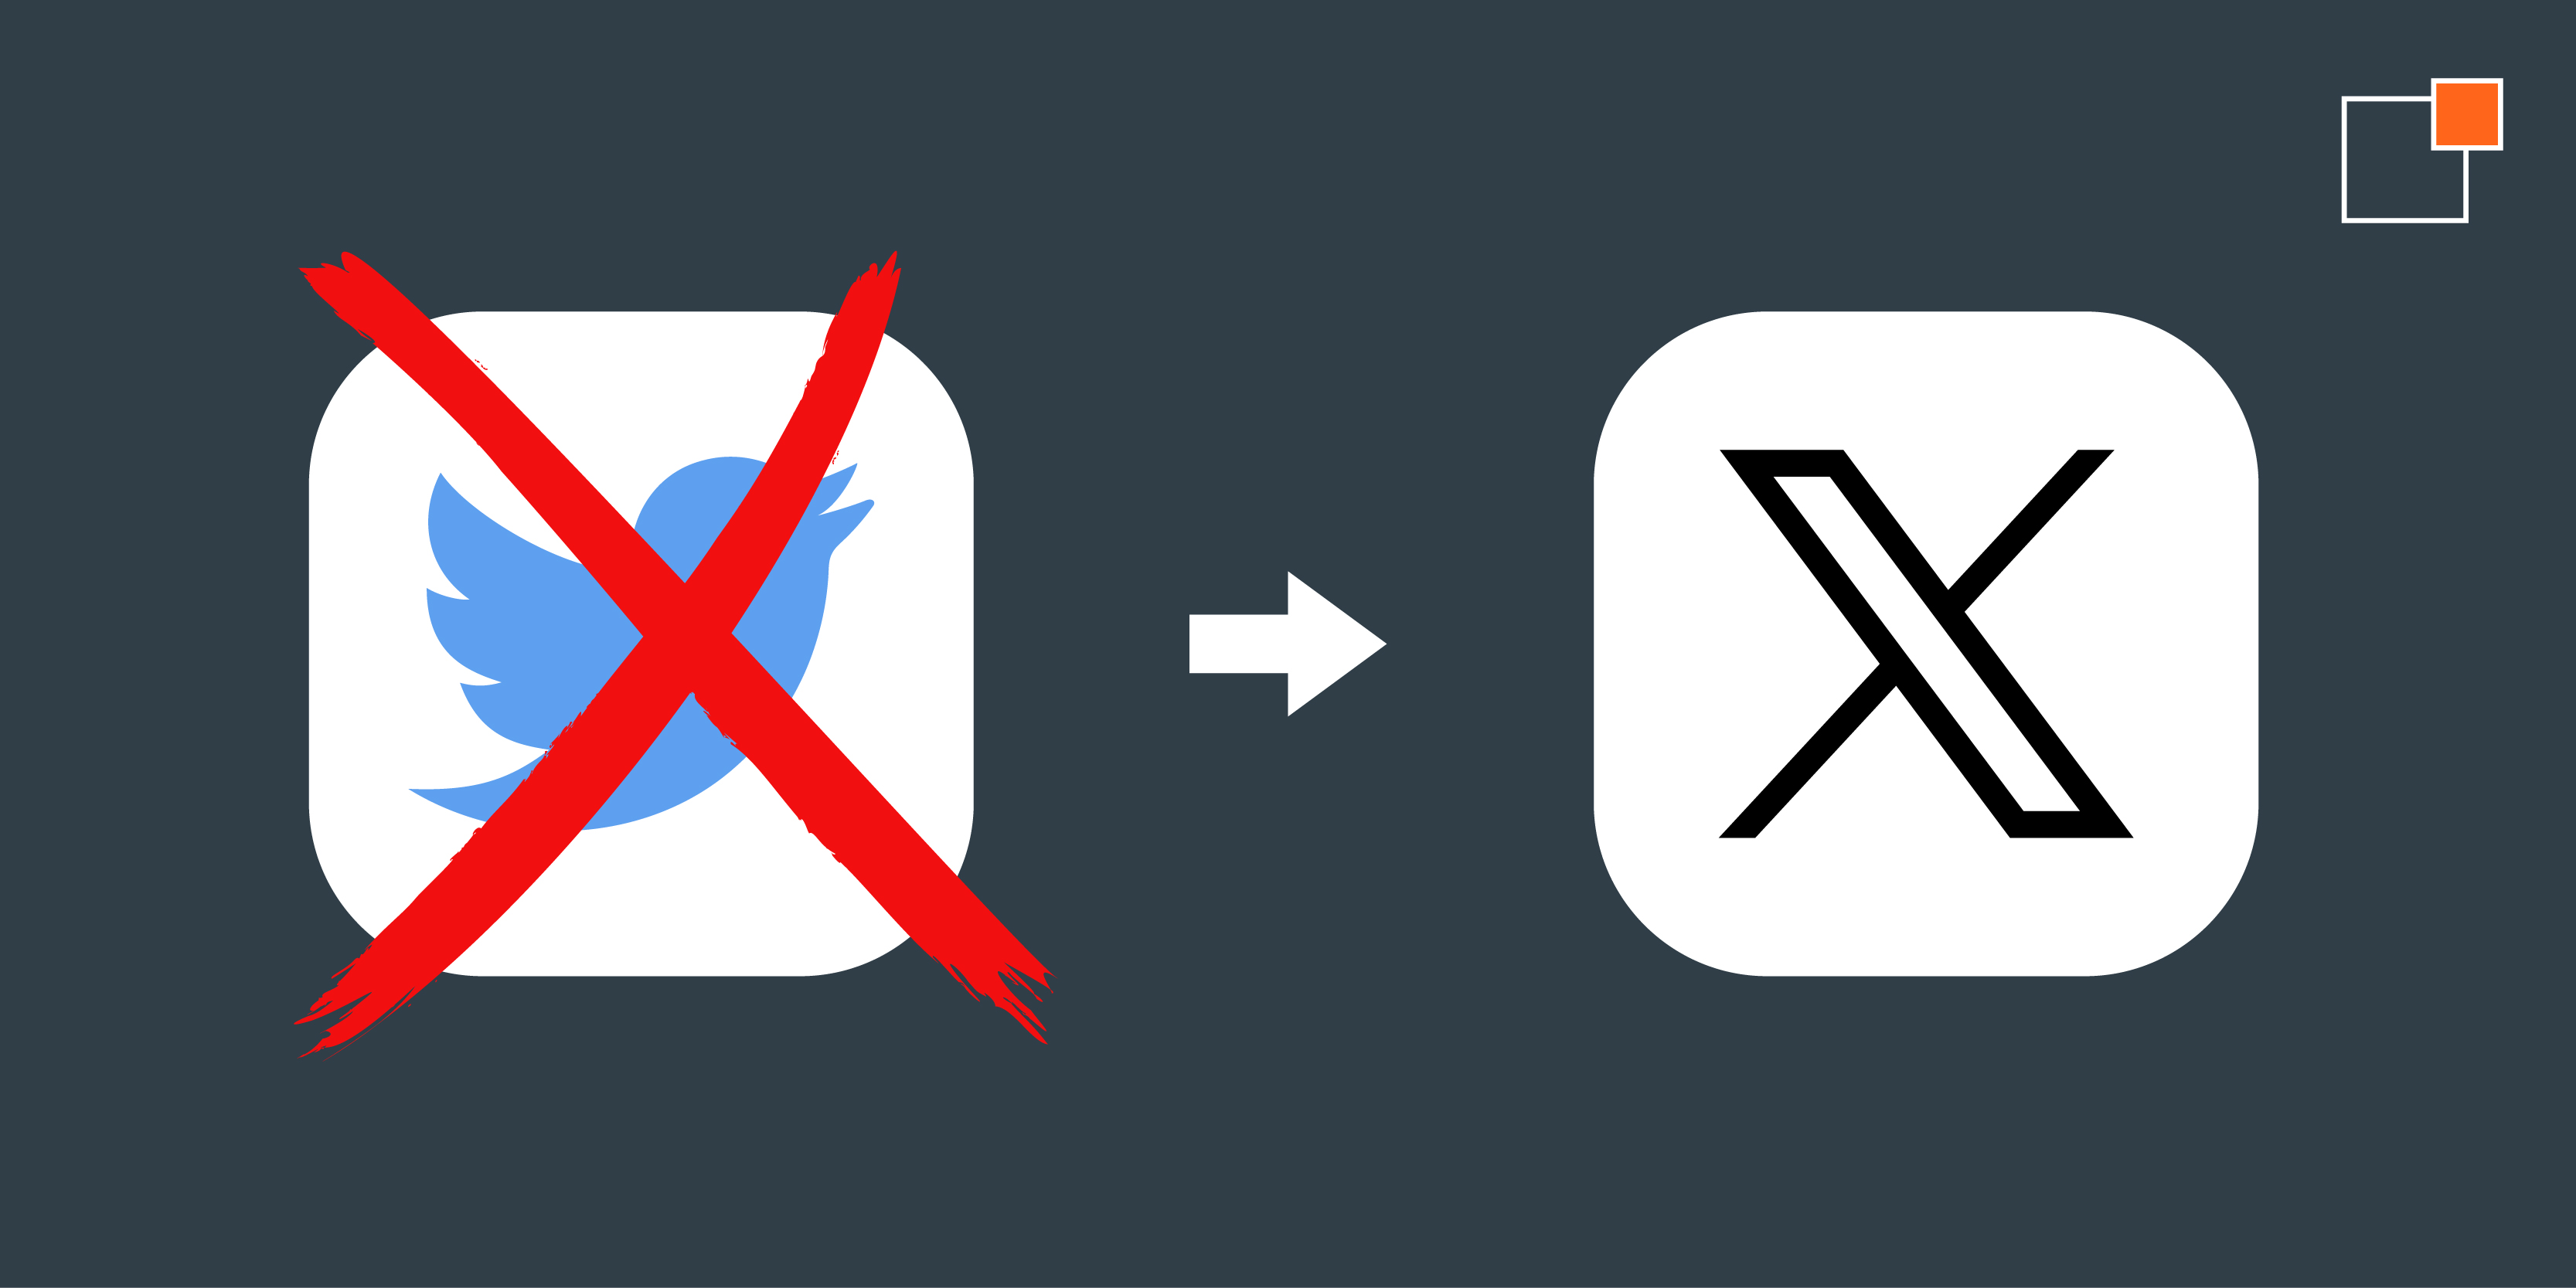 Crossed-out Twitter logo pointing to the new "X" logo